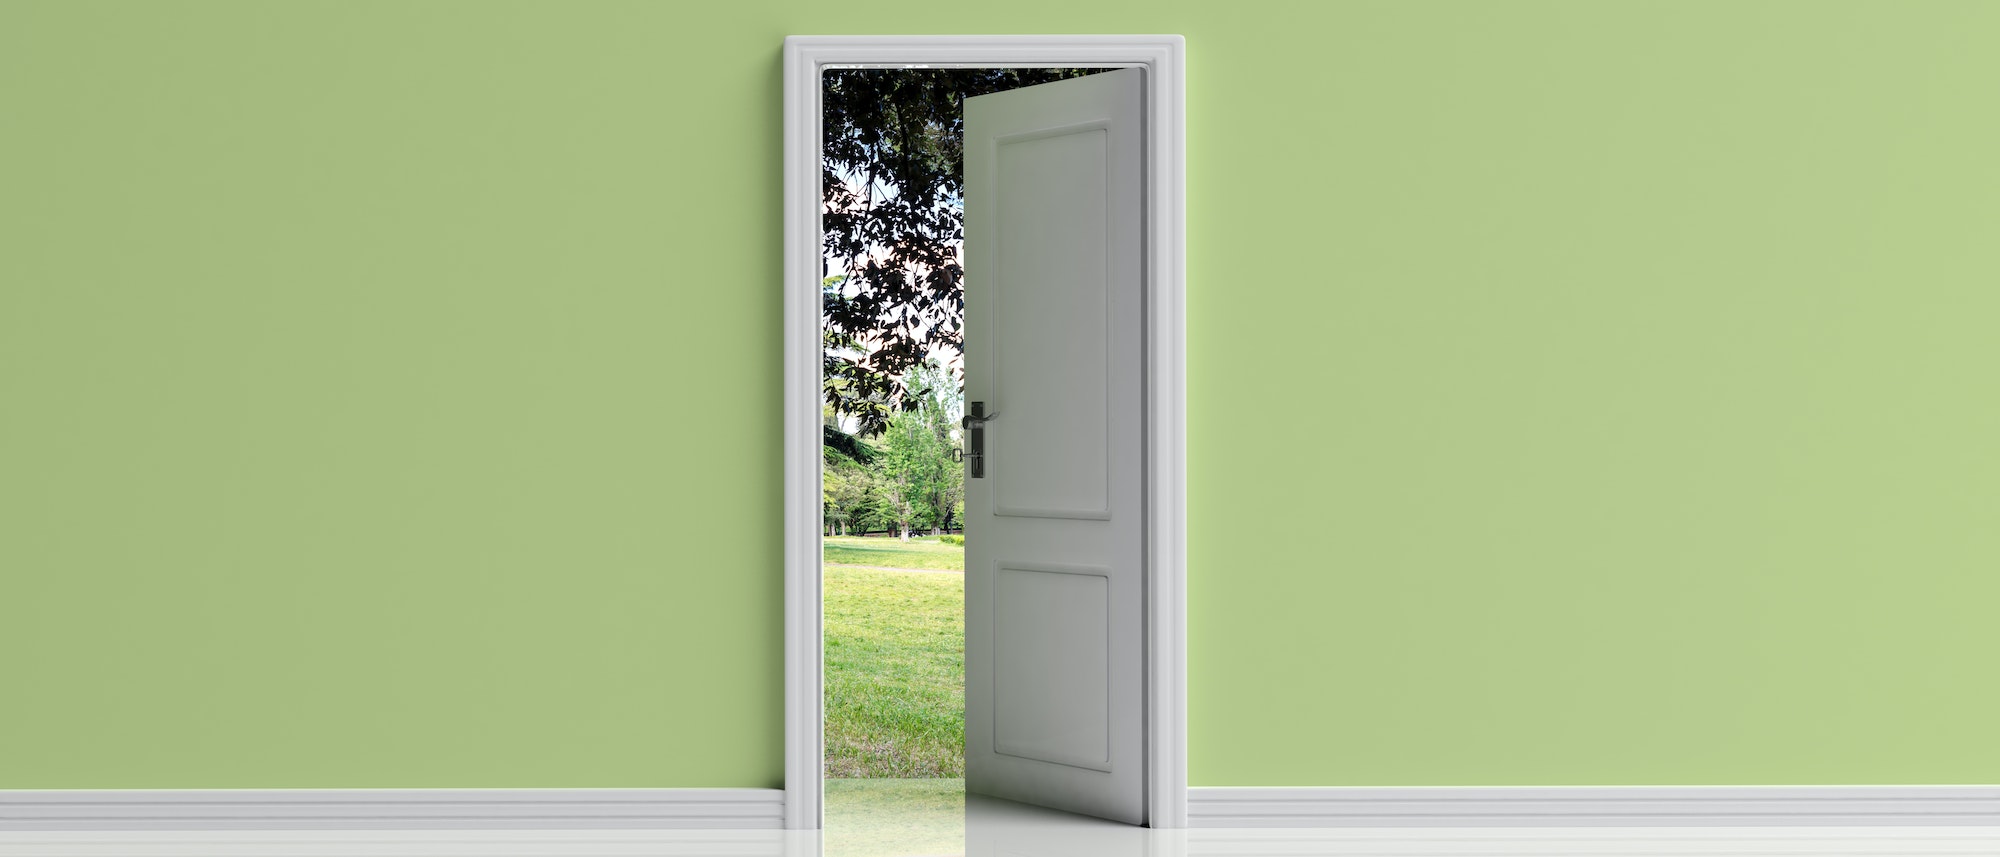 Open door on green pastel wall background, Park view out of the door opening, 3d illustration